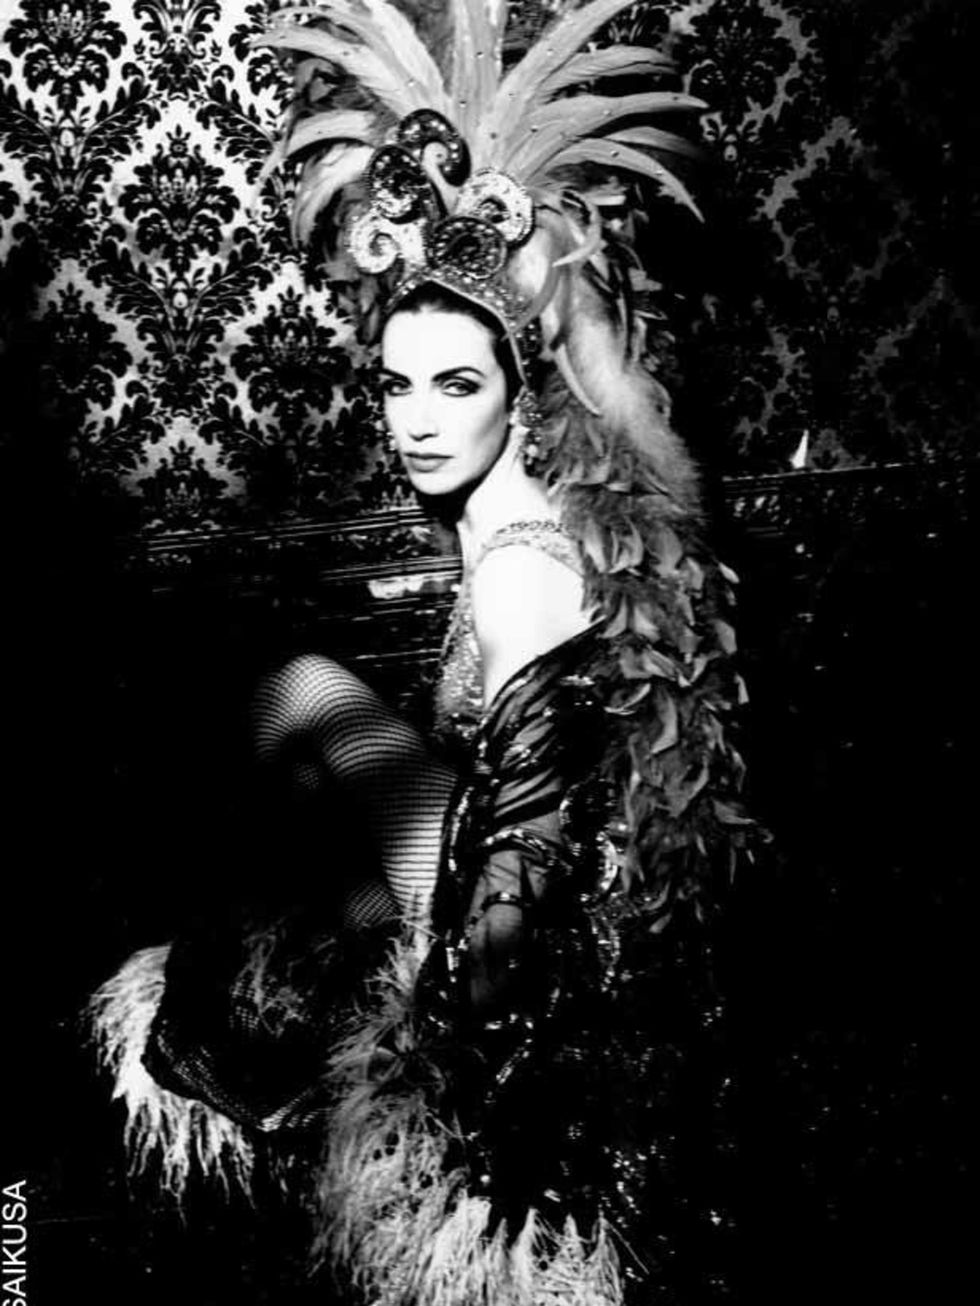 <p><a href="http://www.elleuk.com/content/search?SearchText=Annie+Lennox&amp;SearchButton=Search">Annie Lennox</a> poses for the camera in burlesque garb in 1991</p>